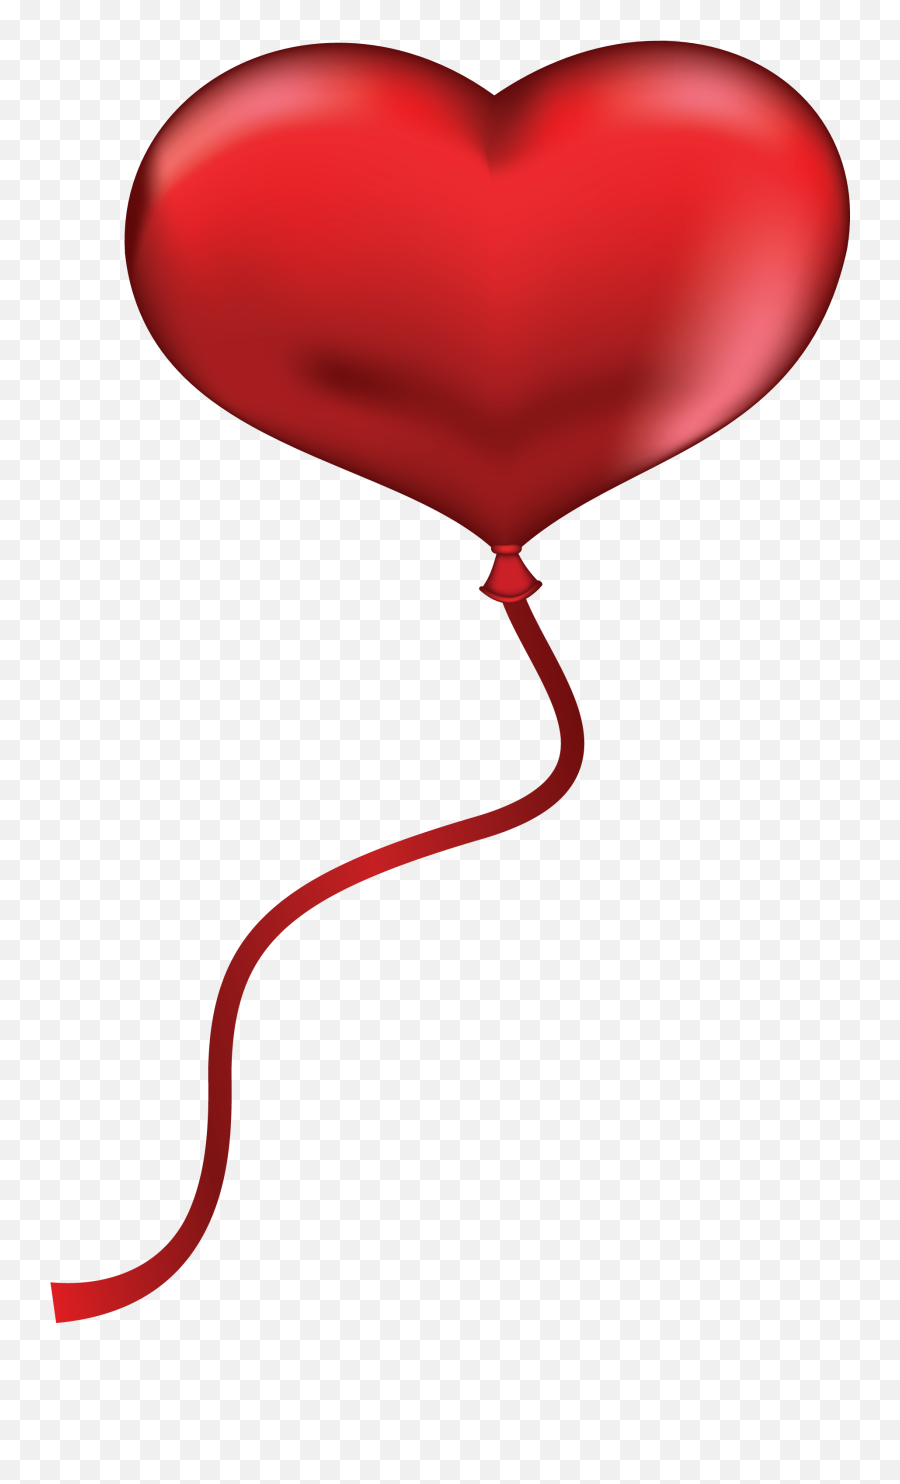 What Does The Black Heart Emoji Mean - Clip Art Heart Balloon,Red Heart Emoji Meaning